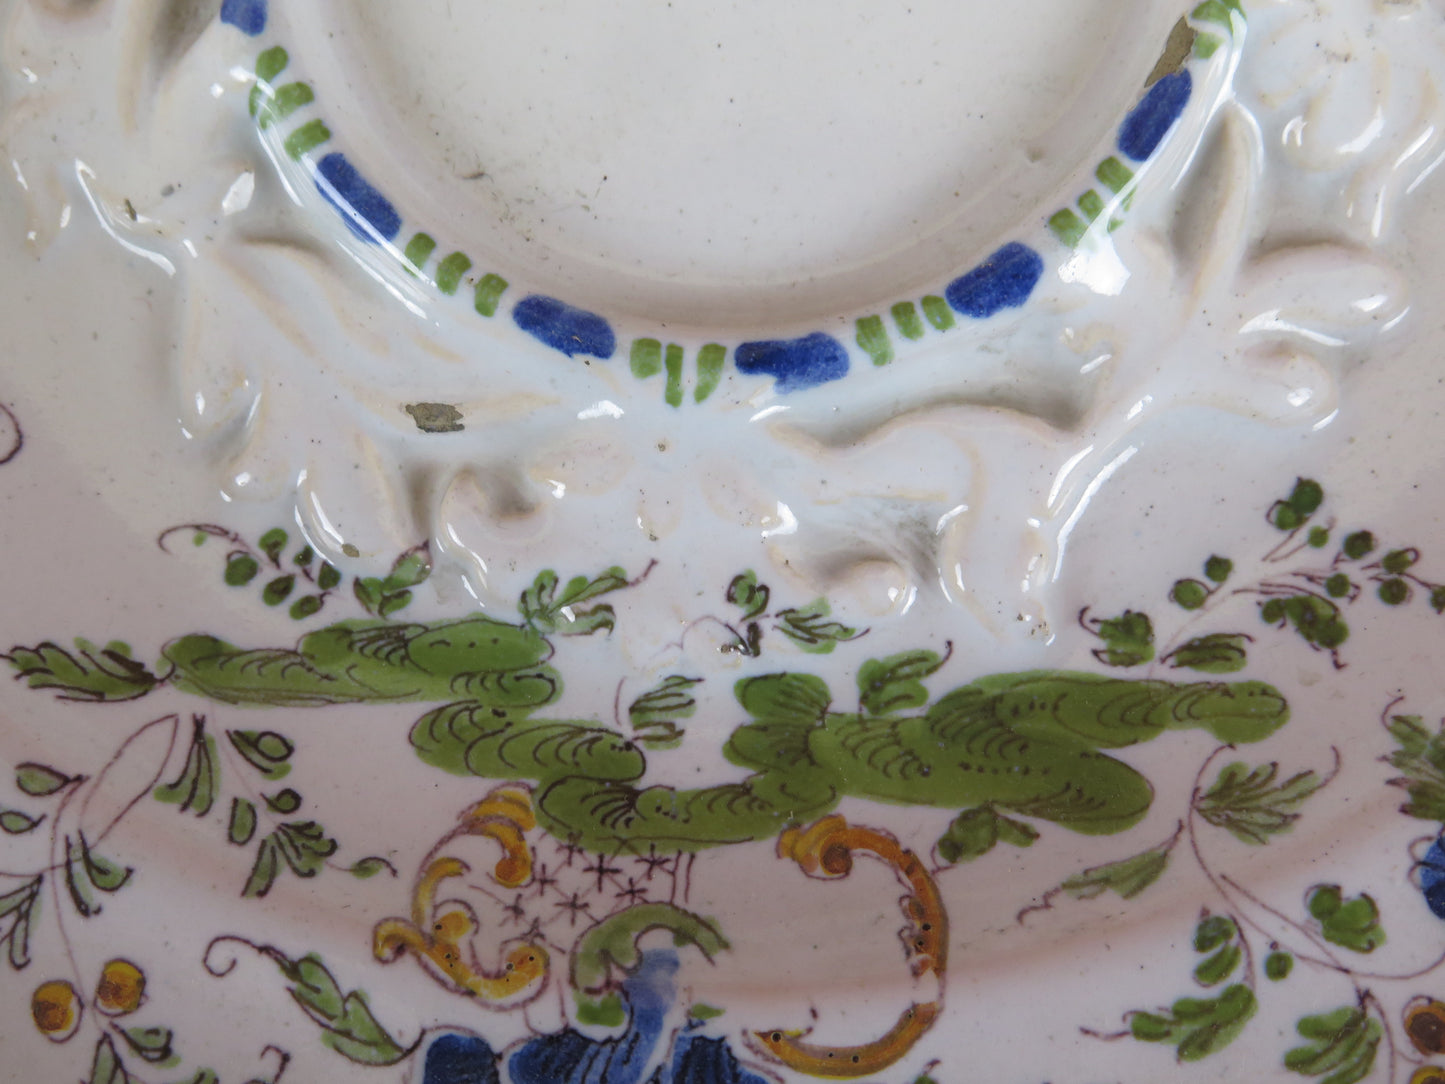 ANTIQUE HAND PAINTED MAILIC PLATE FAIENCE CERAMIC VS16